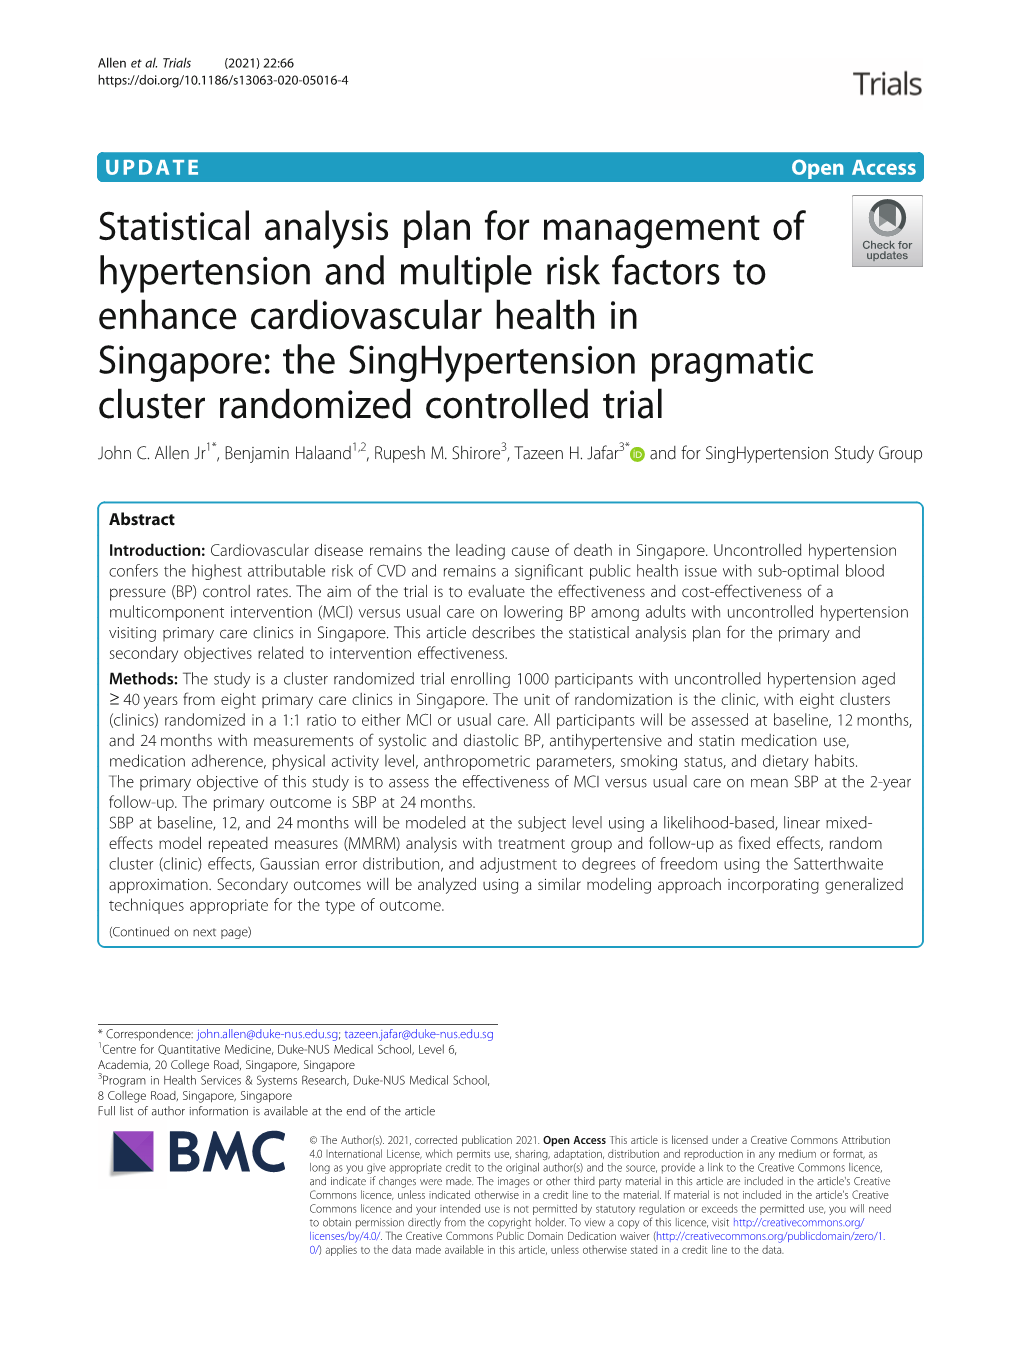 Statistical Analysis Plan for Management of Hypertension And